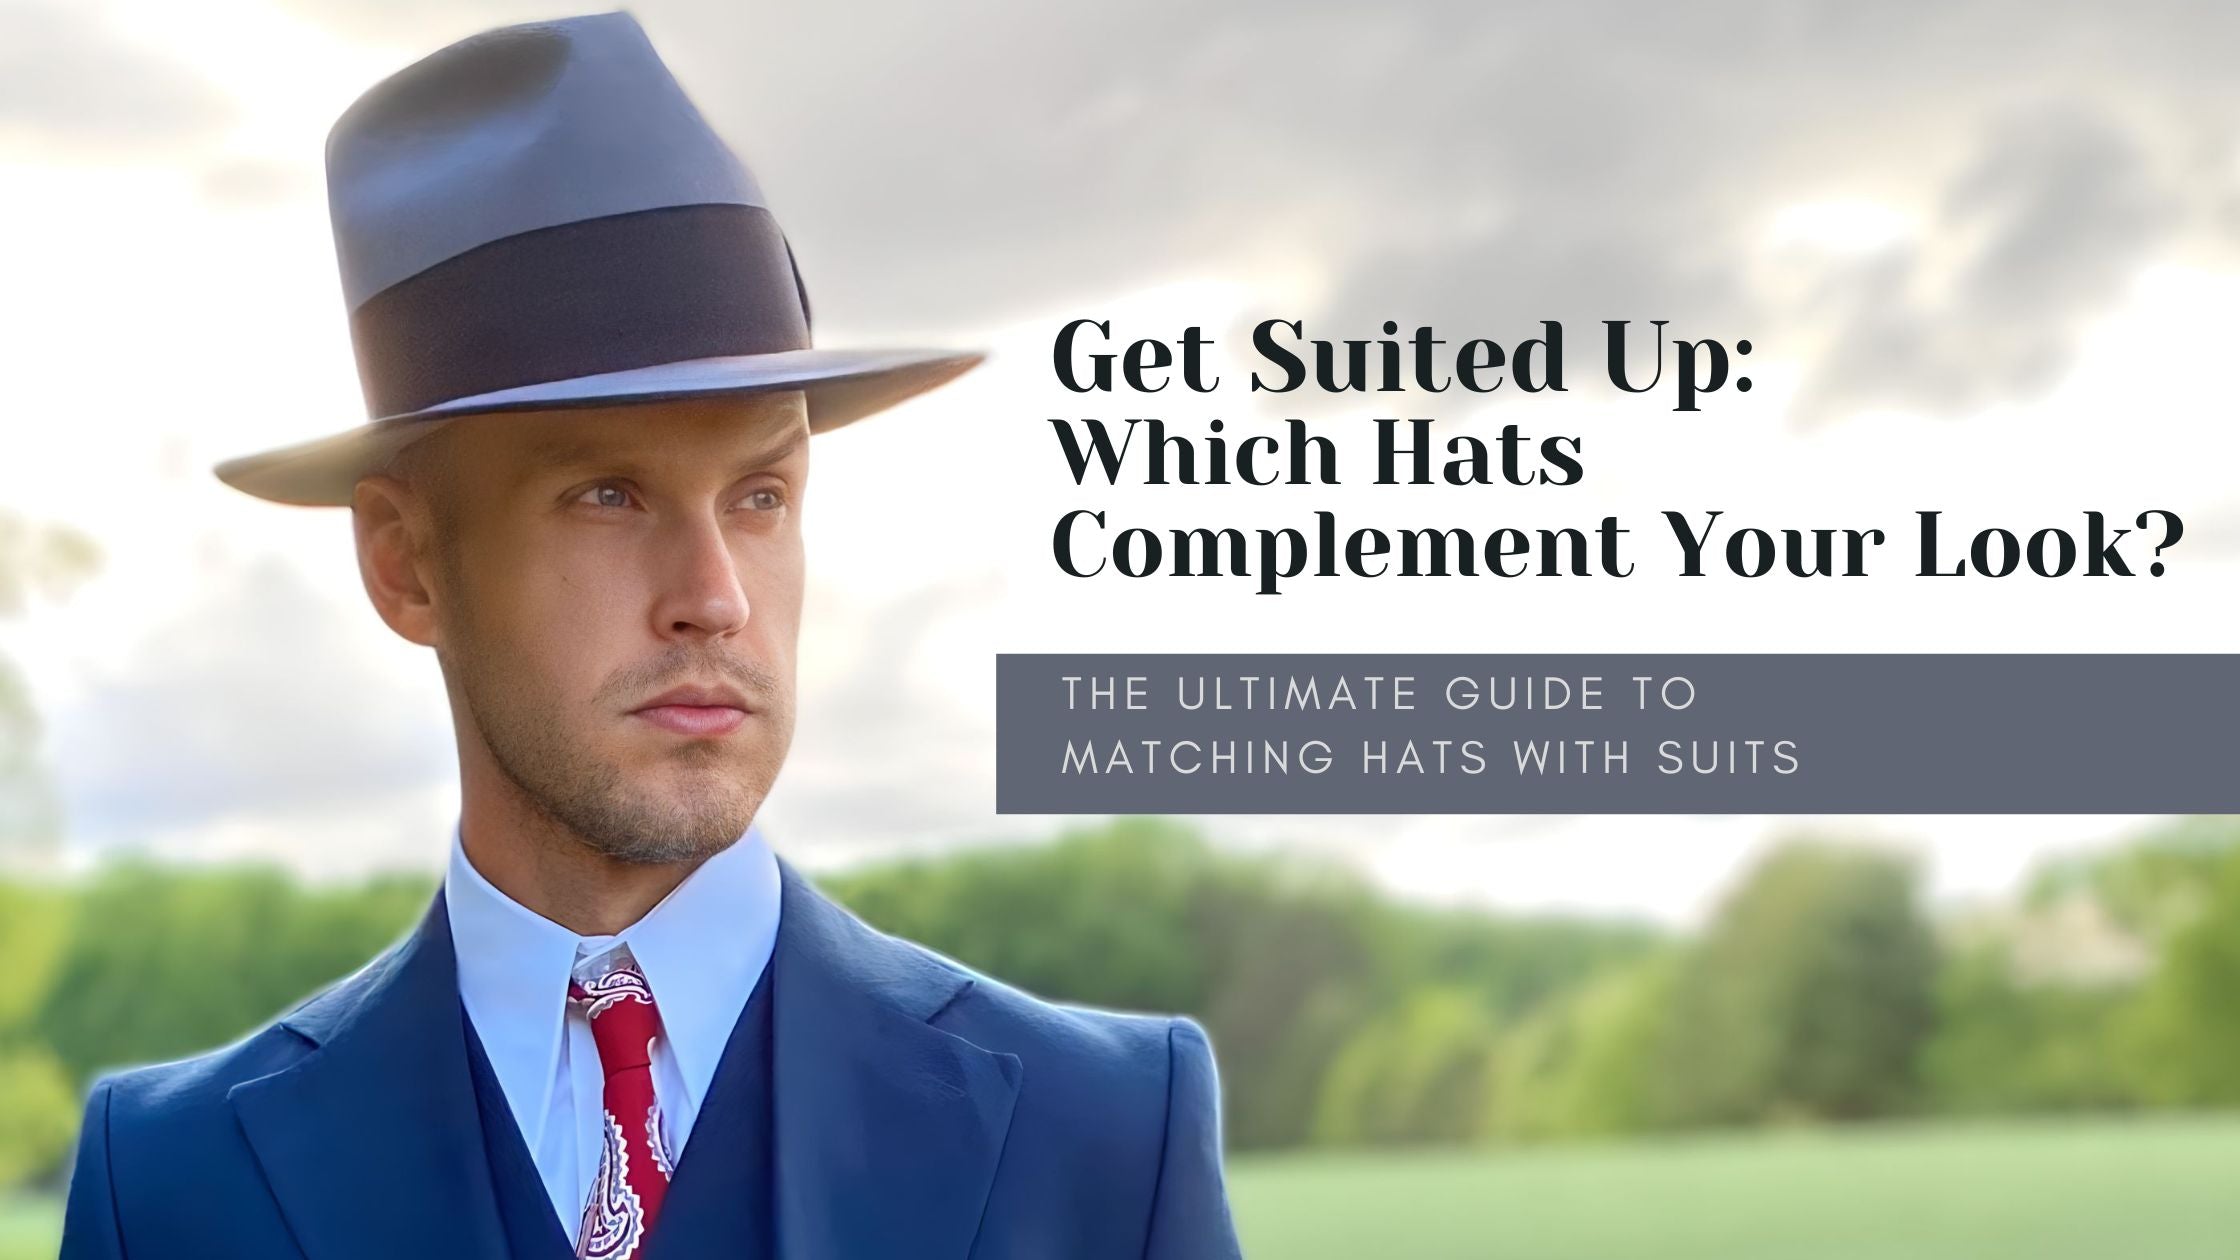 Articles of Style  A GUIDE TO MEN'S HAT STYLES